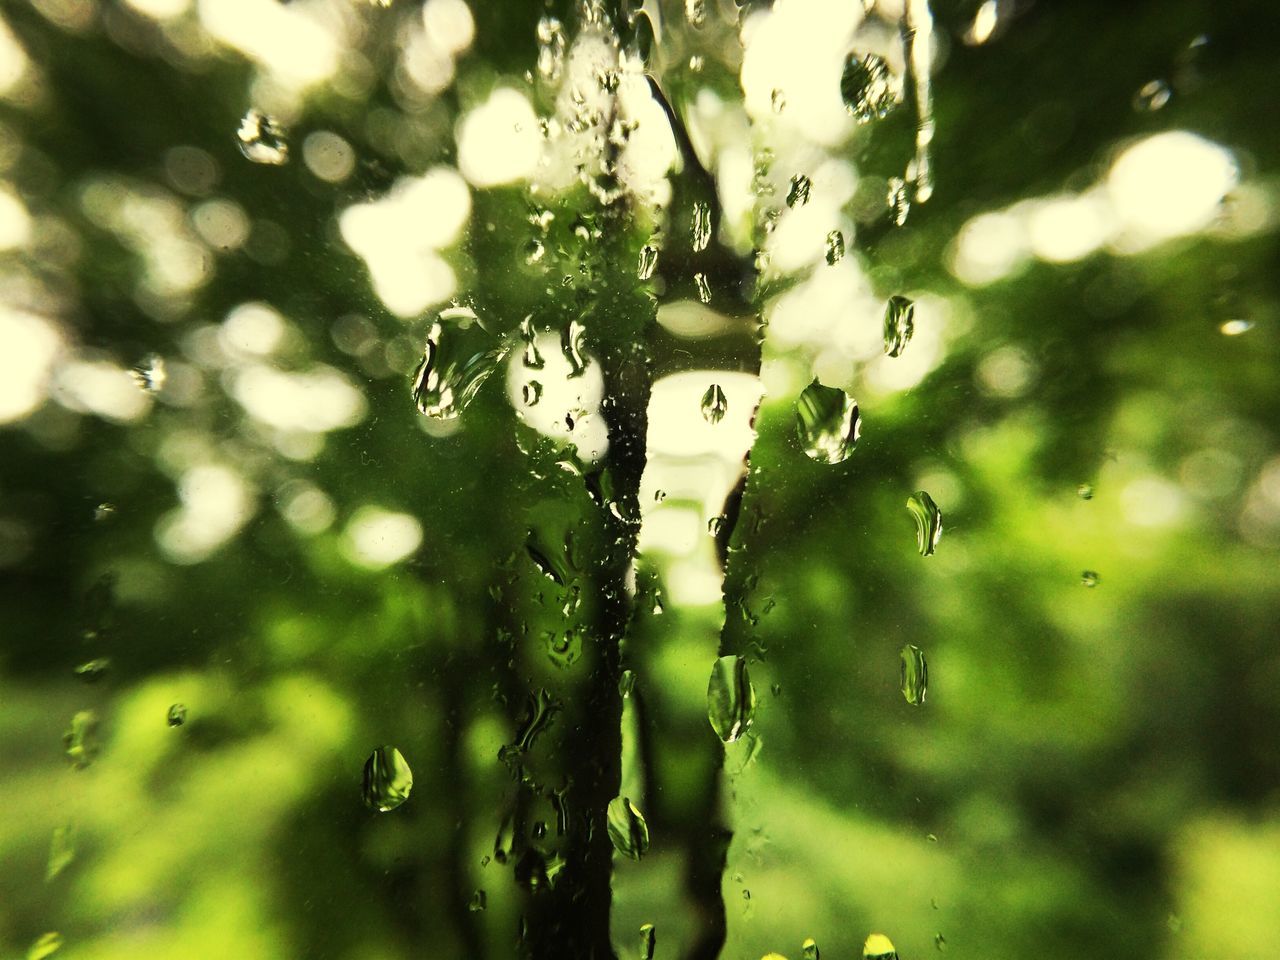 drop, water, wet, rain, focus on foreground, close-up, raindrop, weather, transparent, glass - material, monsoon, selective focus, season, reflection, rainy season, window, indoors, day, full frame, no people